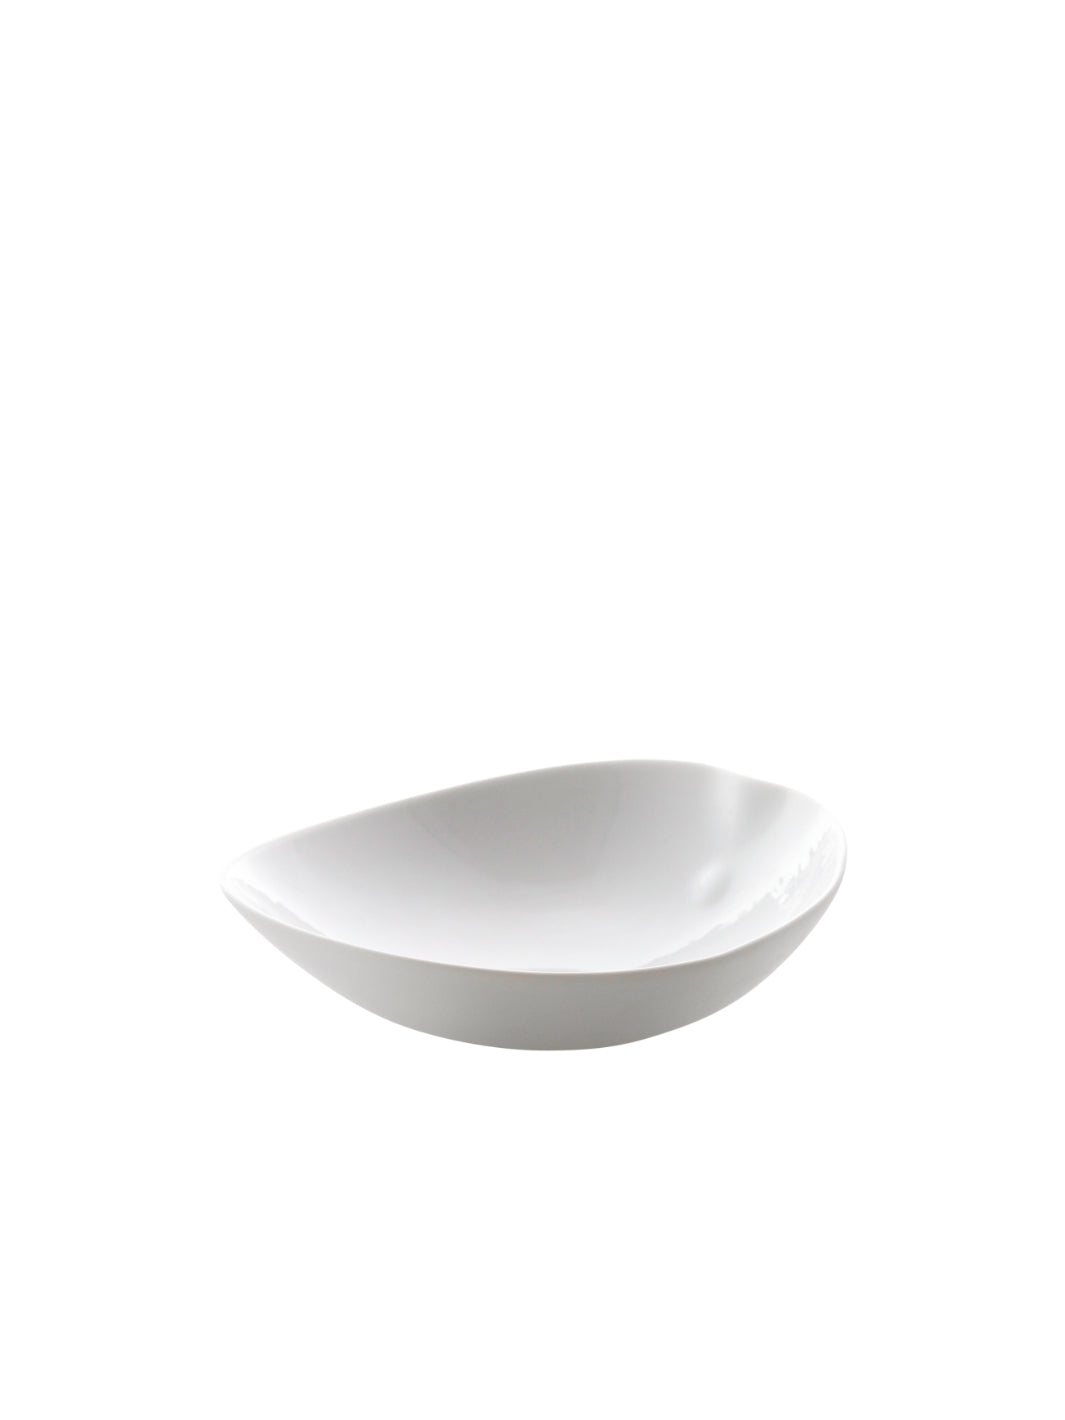 COOKPLAY Shell Salad Bowl (22x21.5cm/8.7x8.5in)